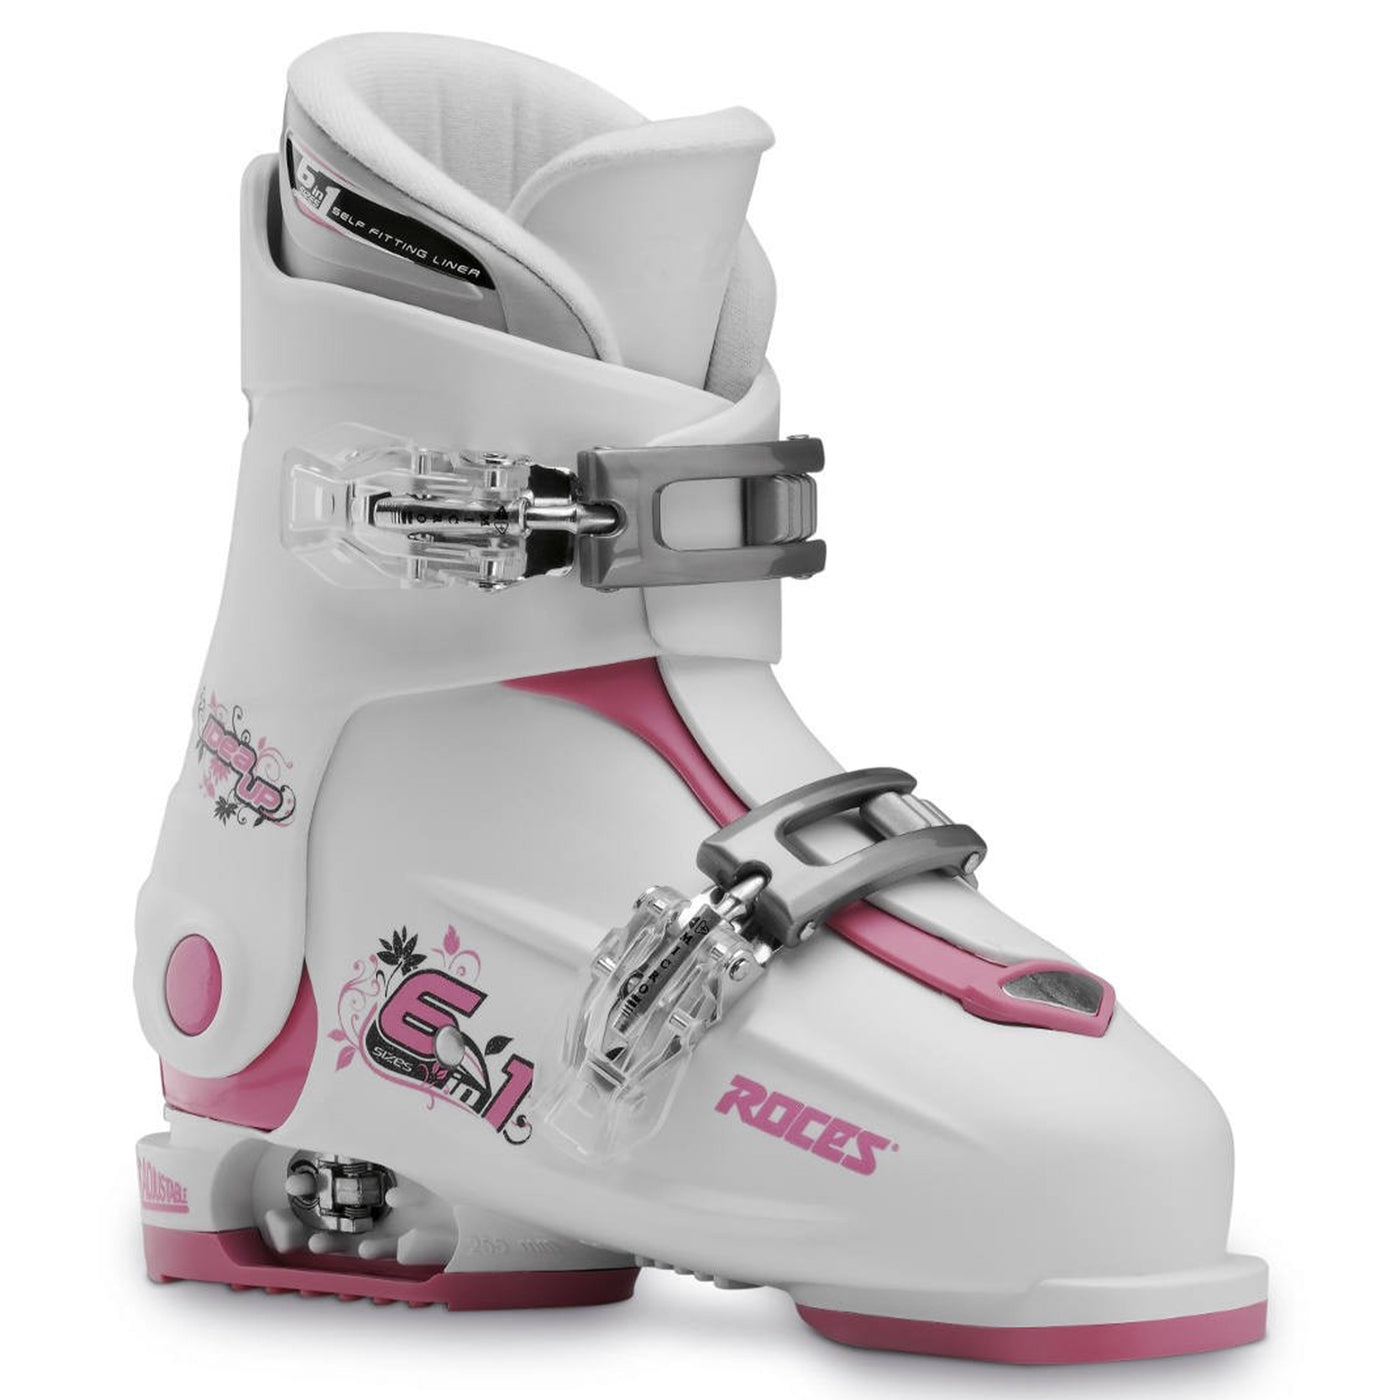 Roces IDEA Up Adjustable Youth Ski Boots | Size 19.0 - 22.0 MP - (OPEN BOX RETURN) SKI BOOTS Roces White/Deep Pink  